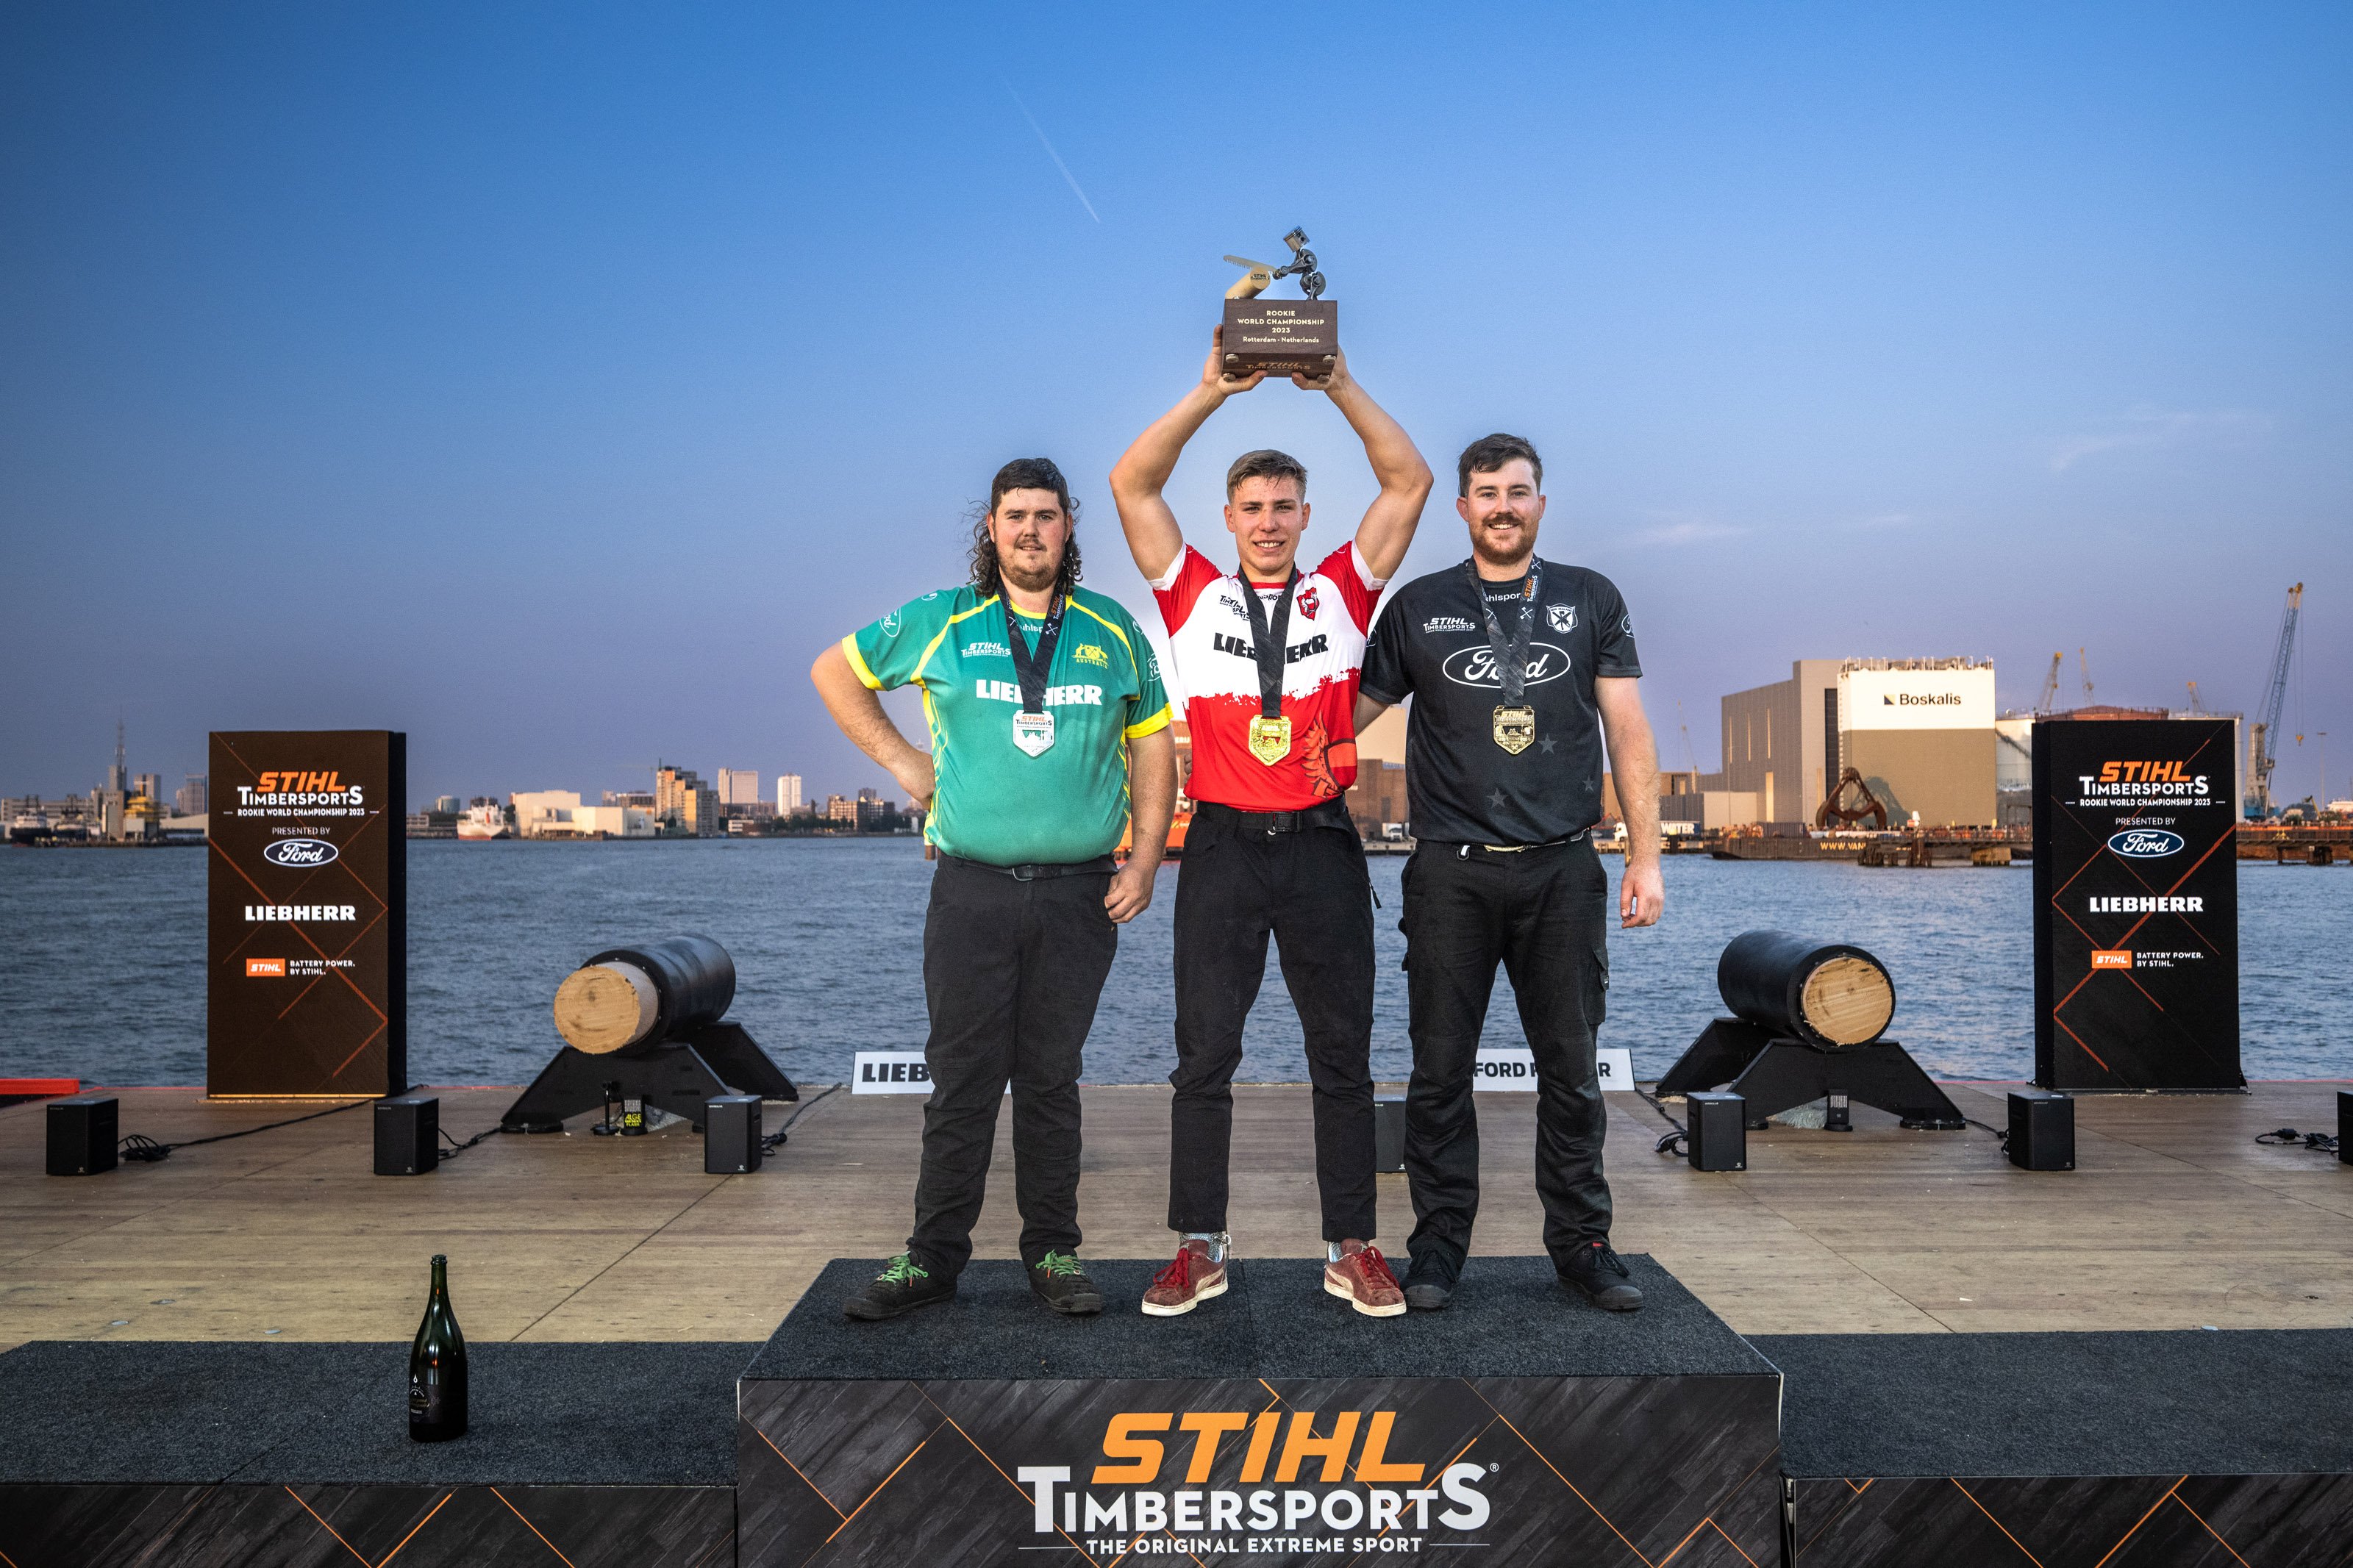 Poland's Szymon Groenwald (Centre), Curtis Bennett from Australia (L.) and Sam Bellamy from New Zealand (R.) placed on the podium at the 2023 Rookie World Championship.